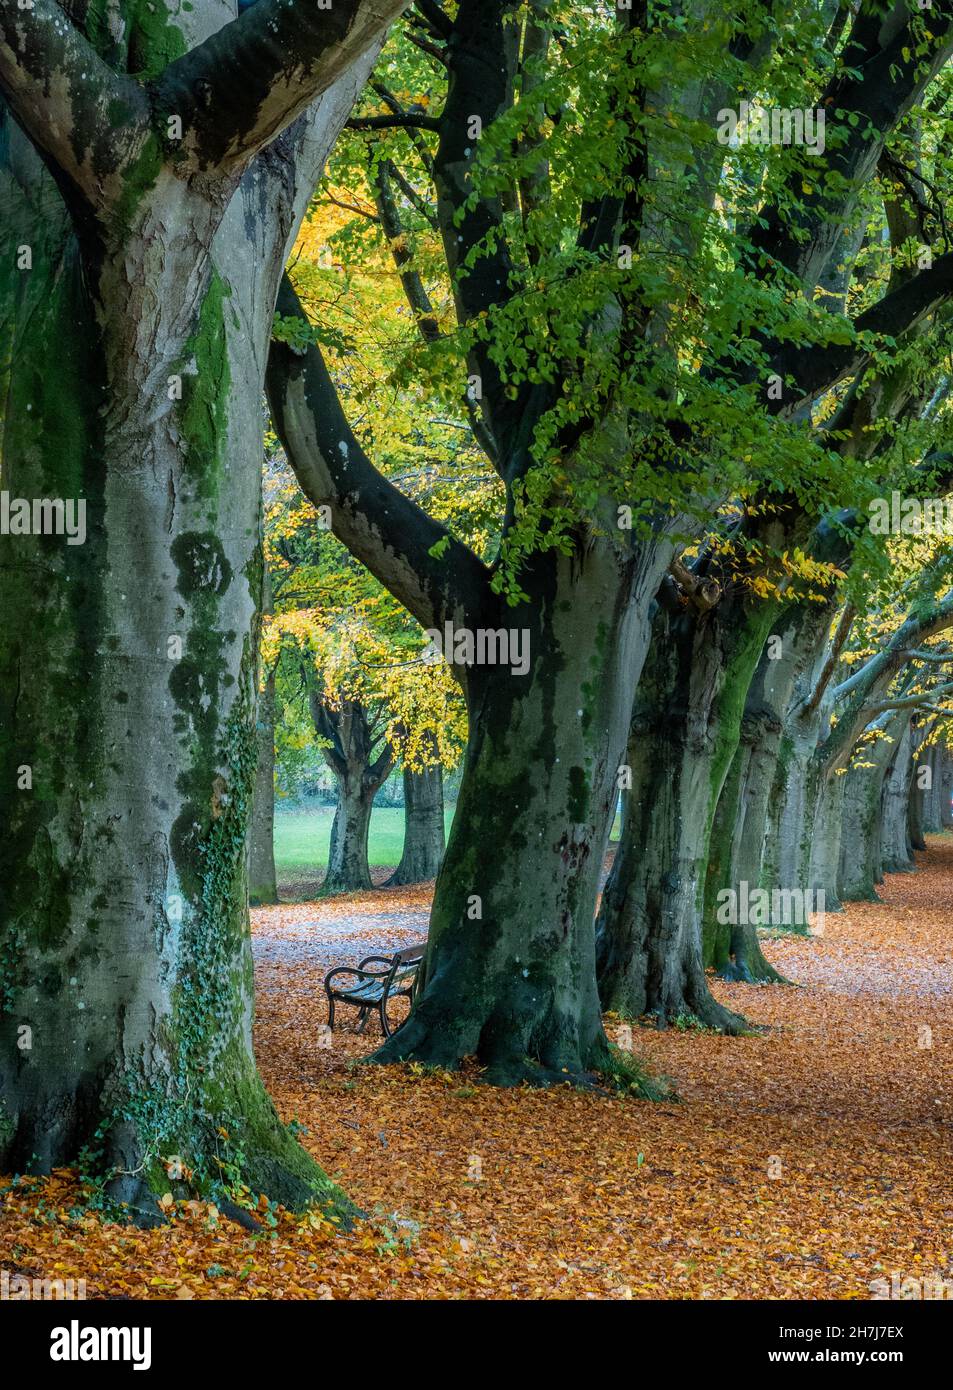 Autumn scene at The Promenade a tree-lined walk on the Downs in Clifton Bristol UK Stock Photo